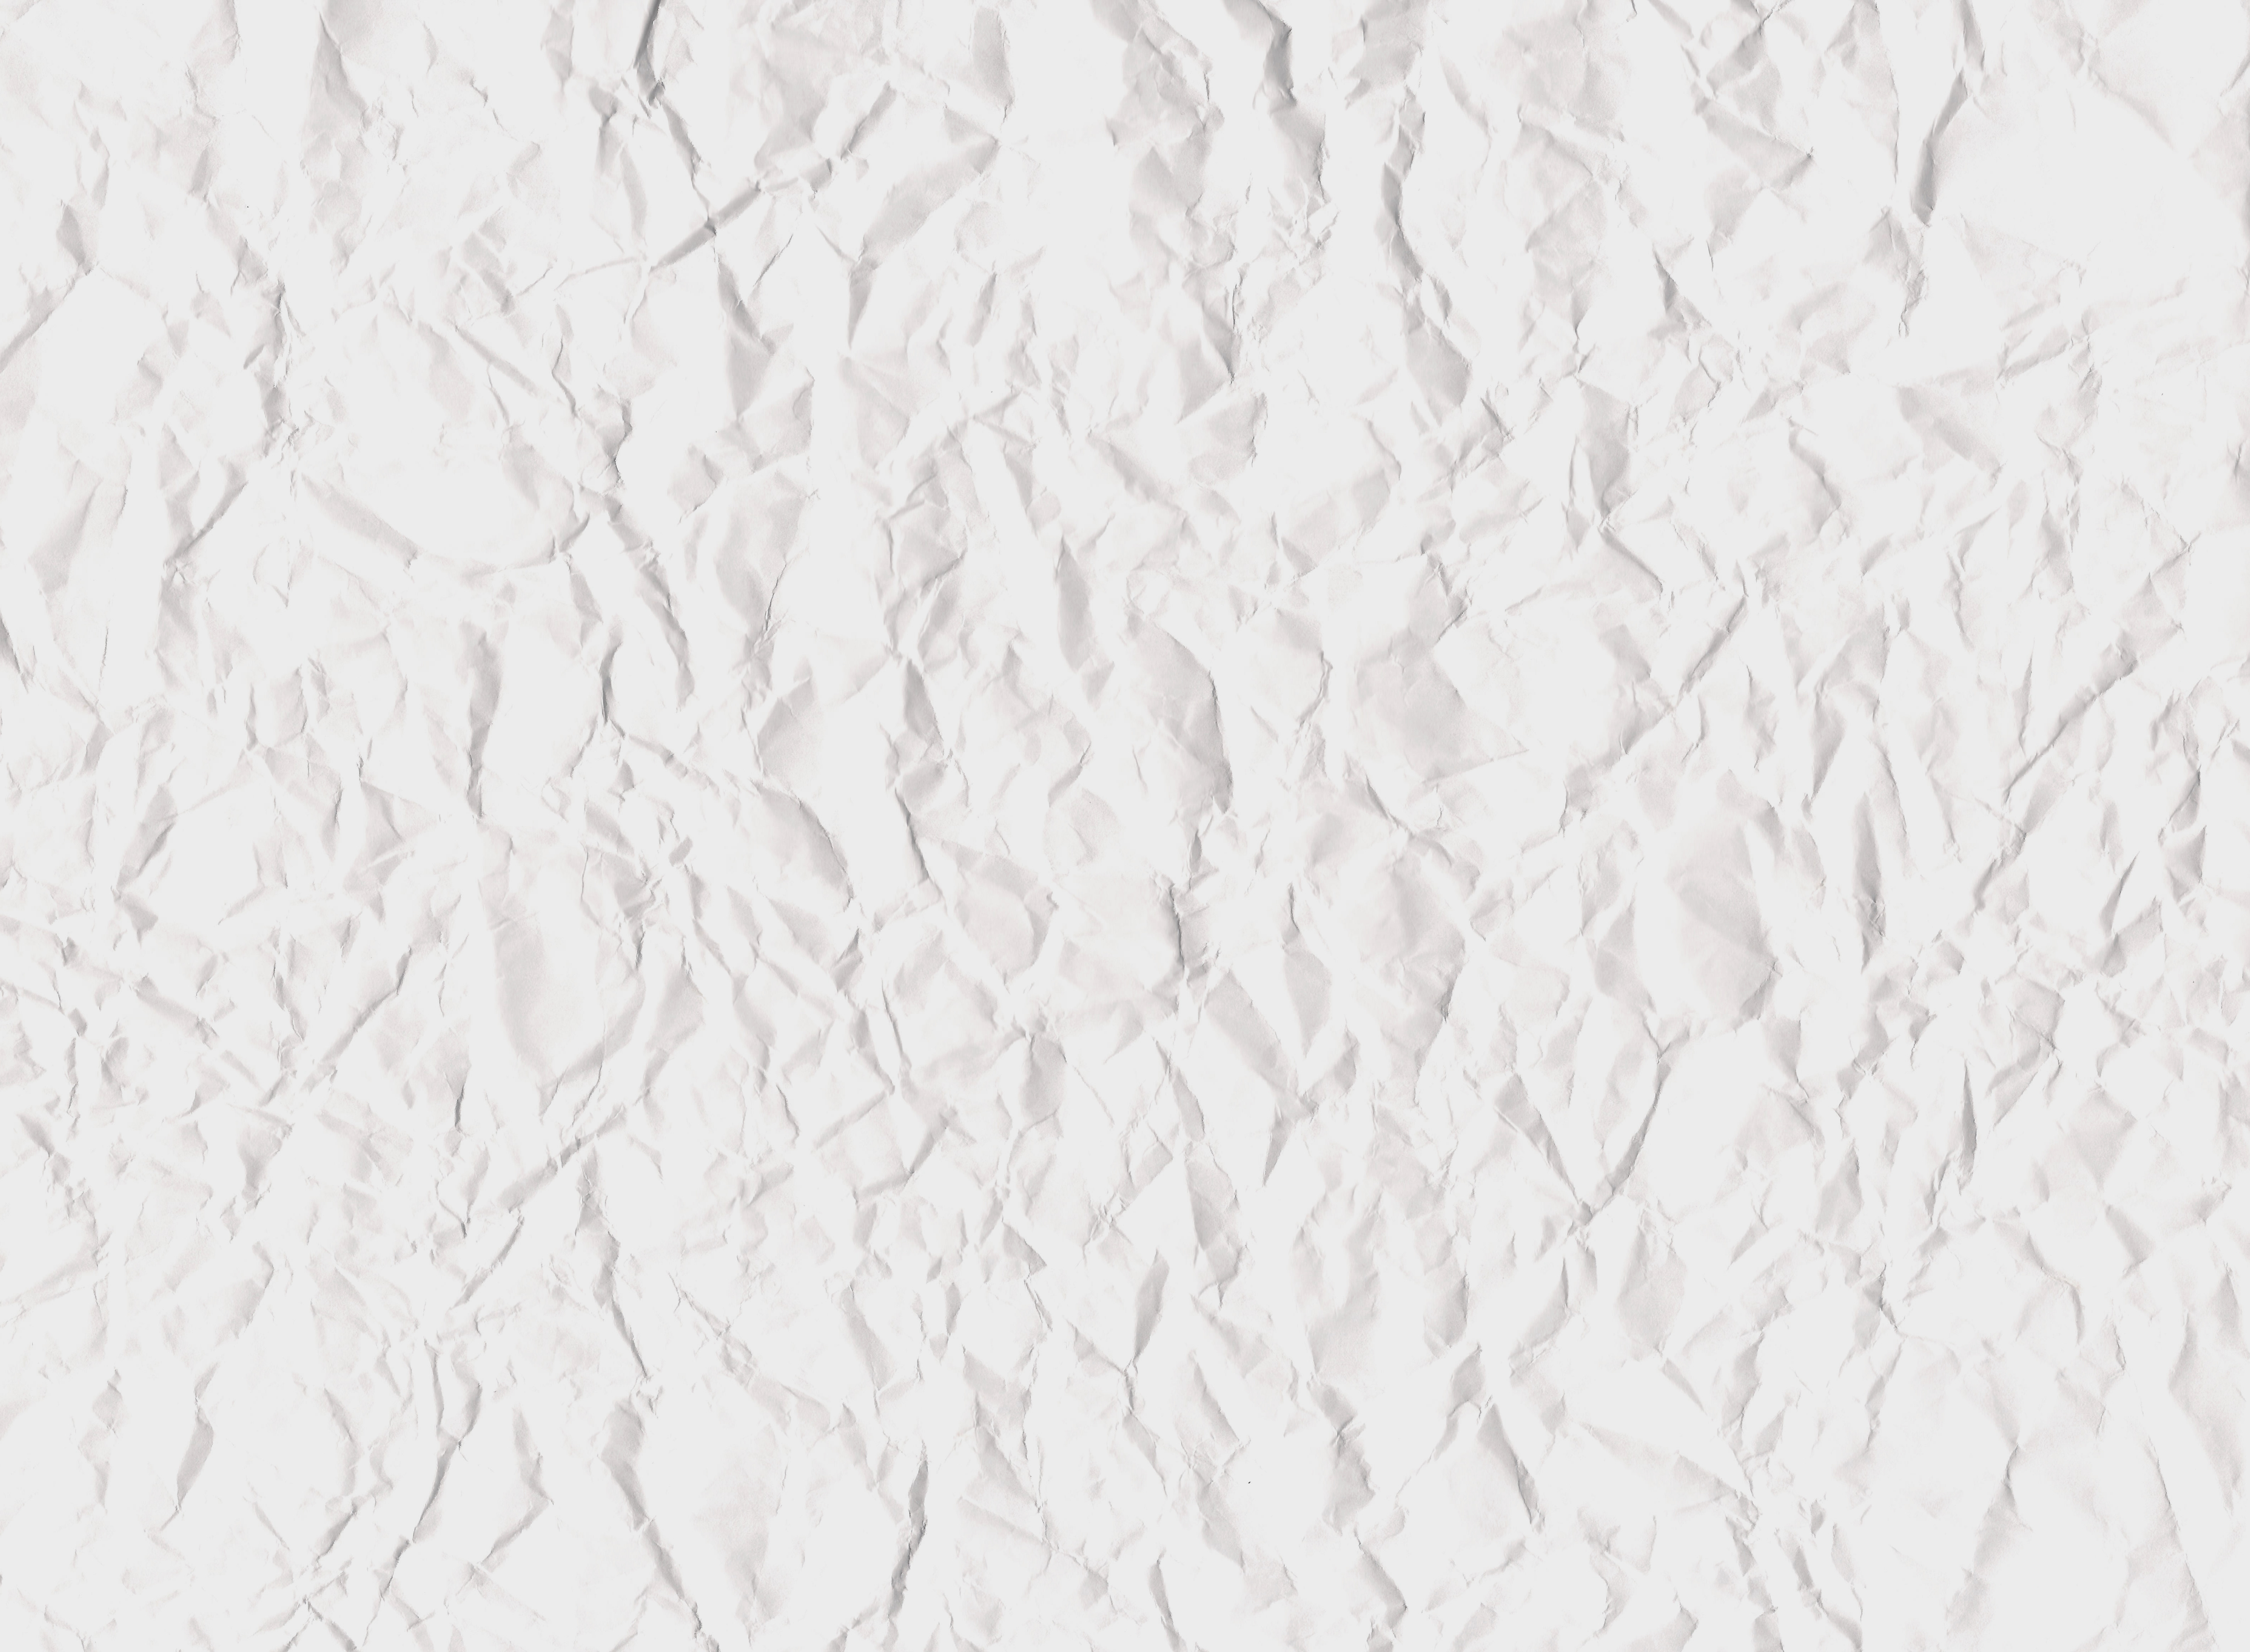 White Wrinkled Paper Texture Free High Resolution Photo Photos